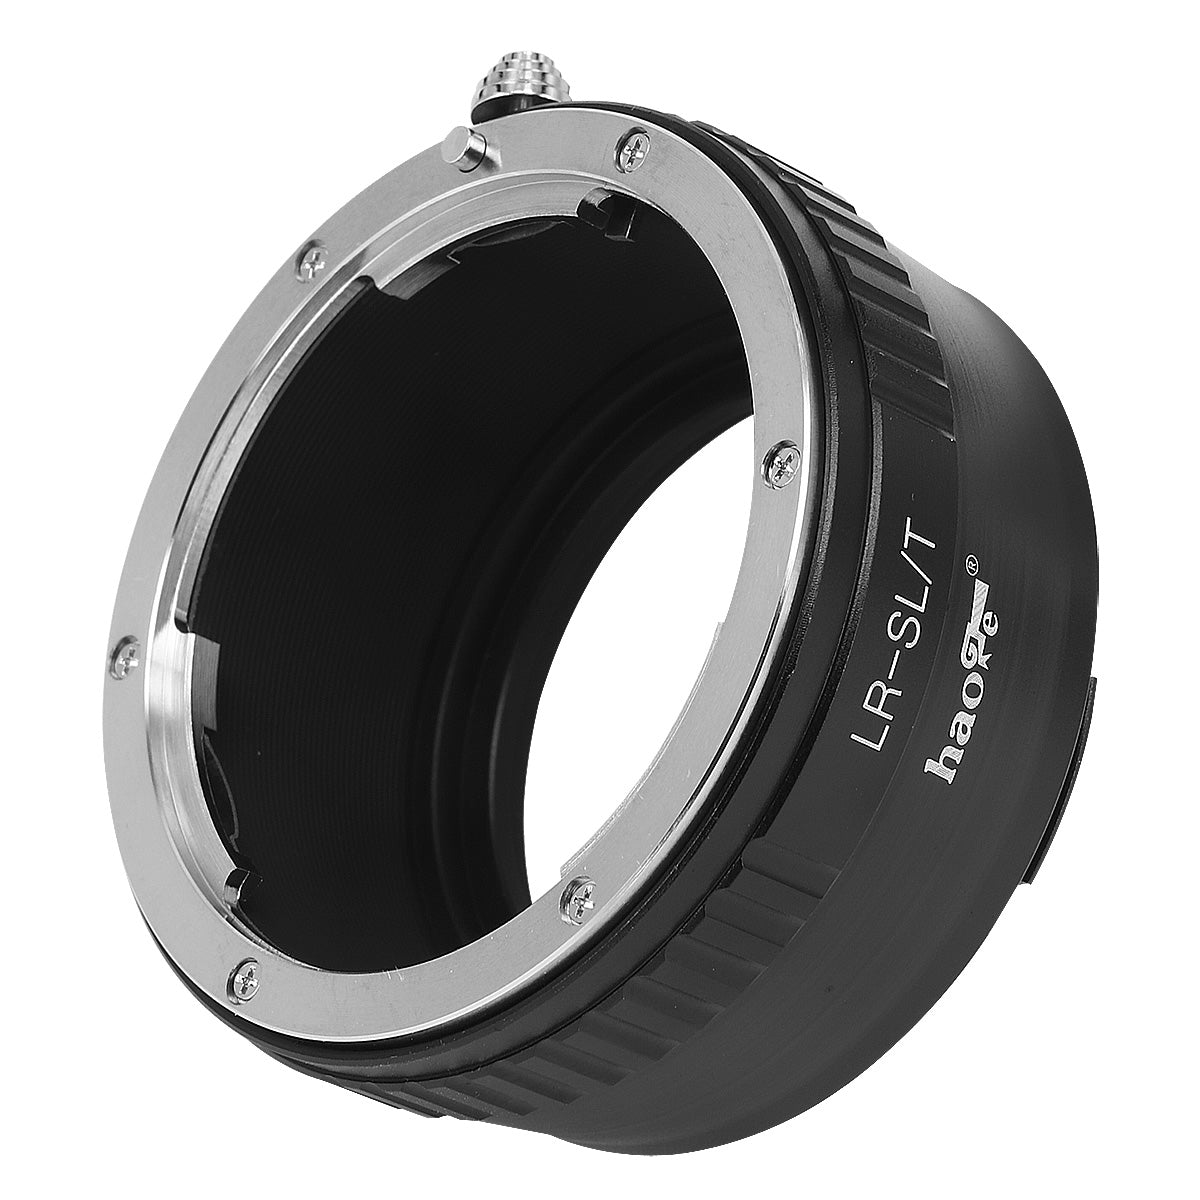 Haoge Manual Lens Mount Adapter for Leica R LR Lens to Leica L Mount Camera such as T , Typ 701 , Typ701 , TL , TL2 , CL (2017) , SL , Typ 601 , Typ601